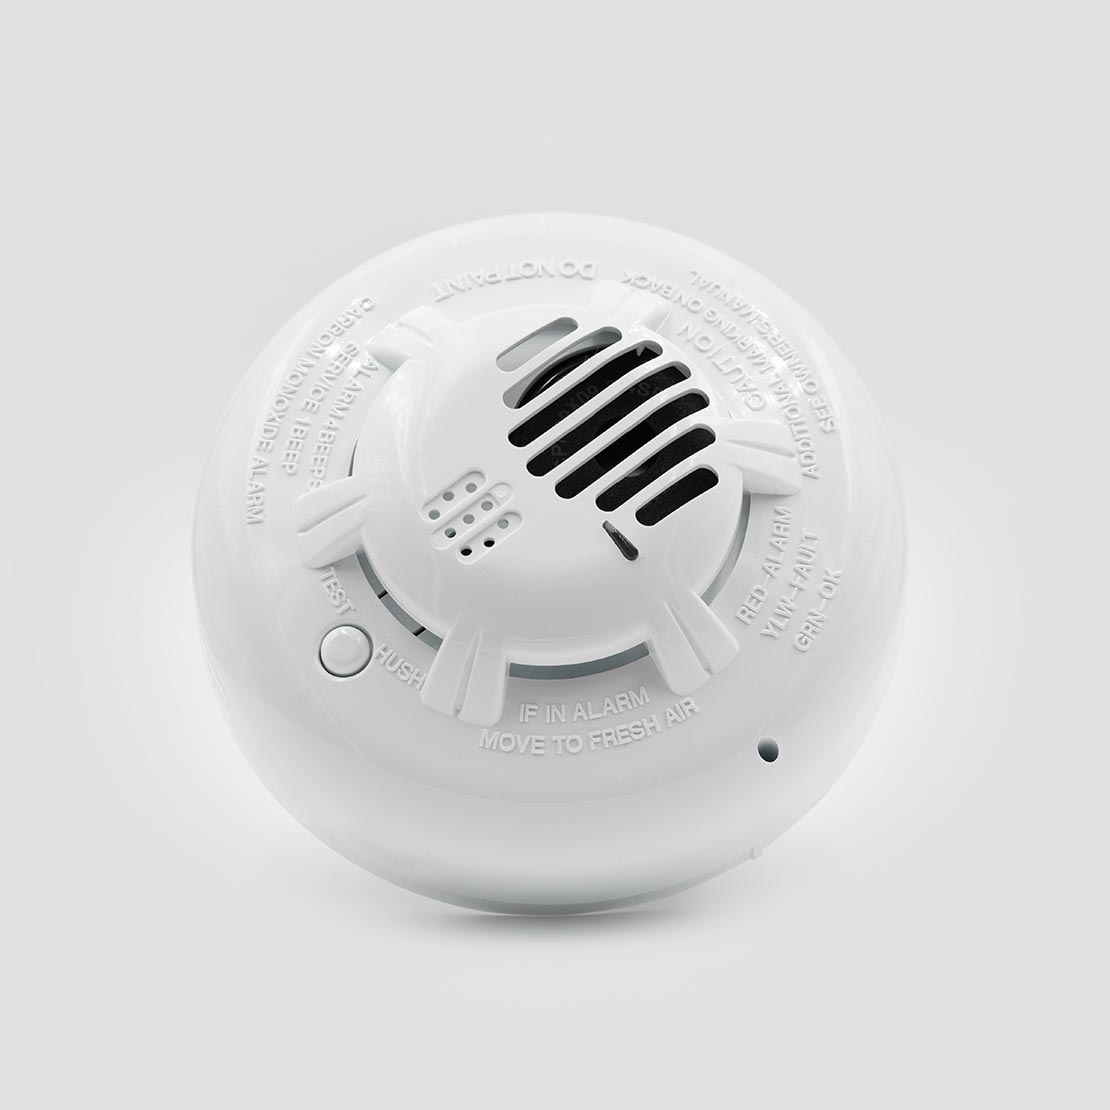 Smoke Detector Testing - Product Support & Information